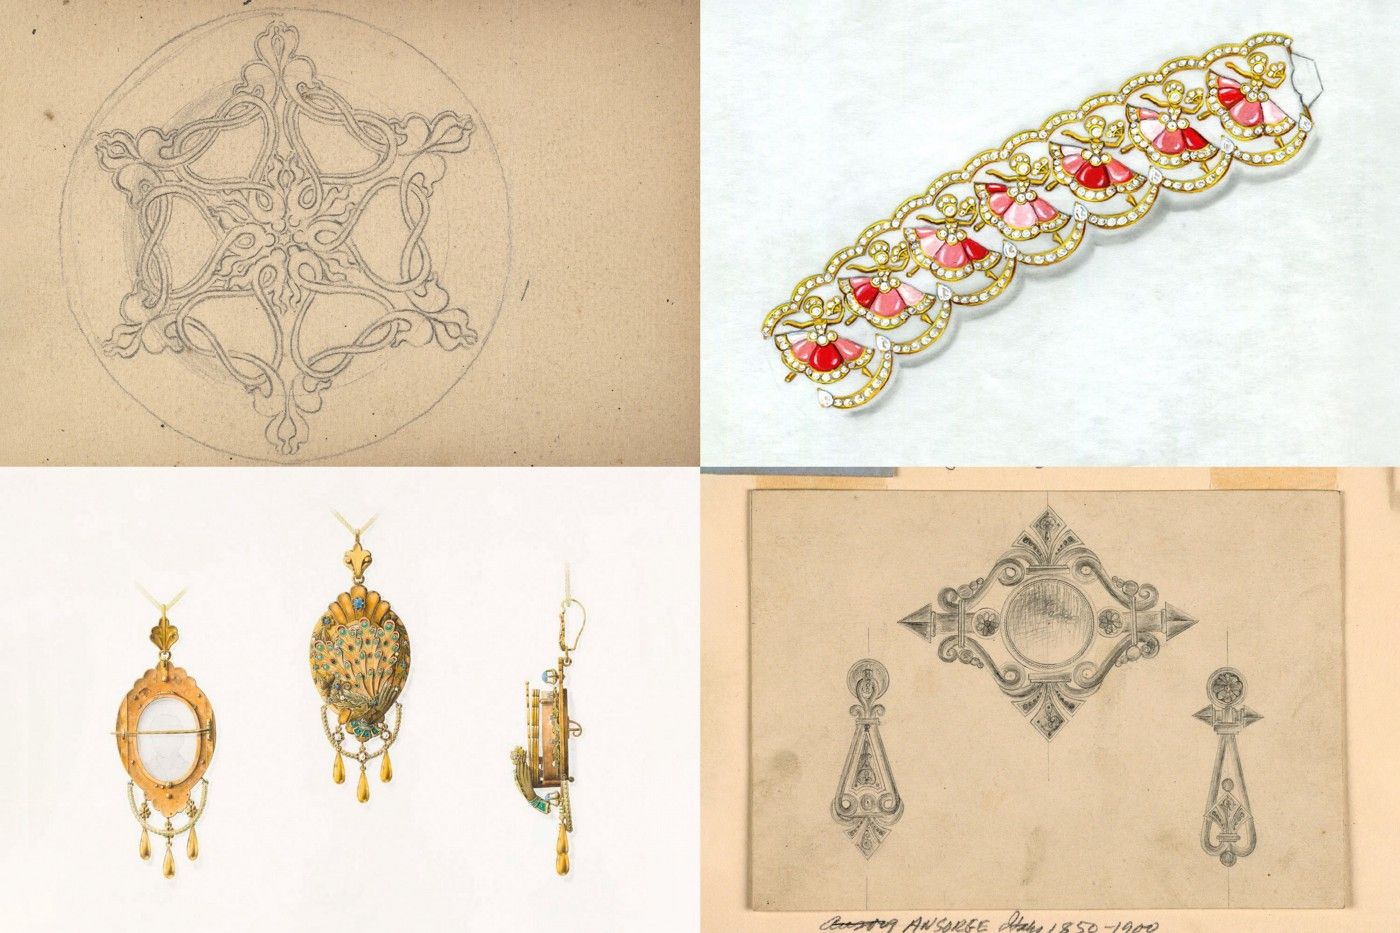 A grid of 4 brooches images, two of them different pencil sketches, two others in full colour.